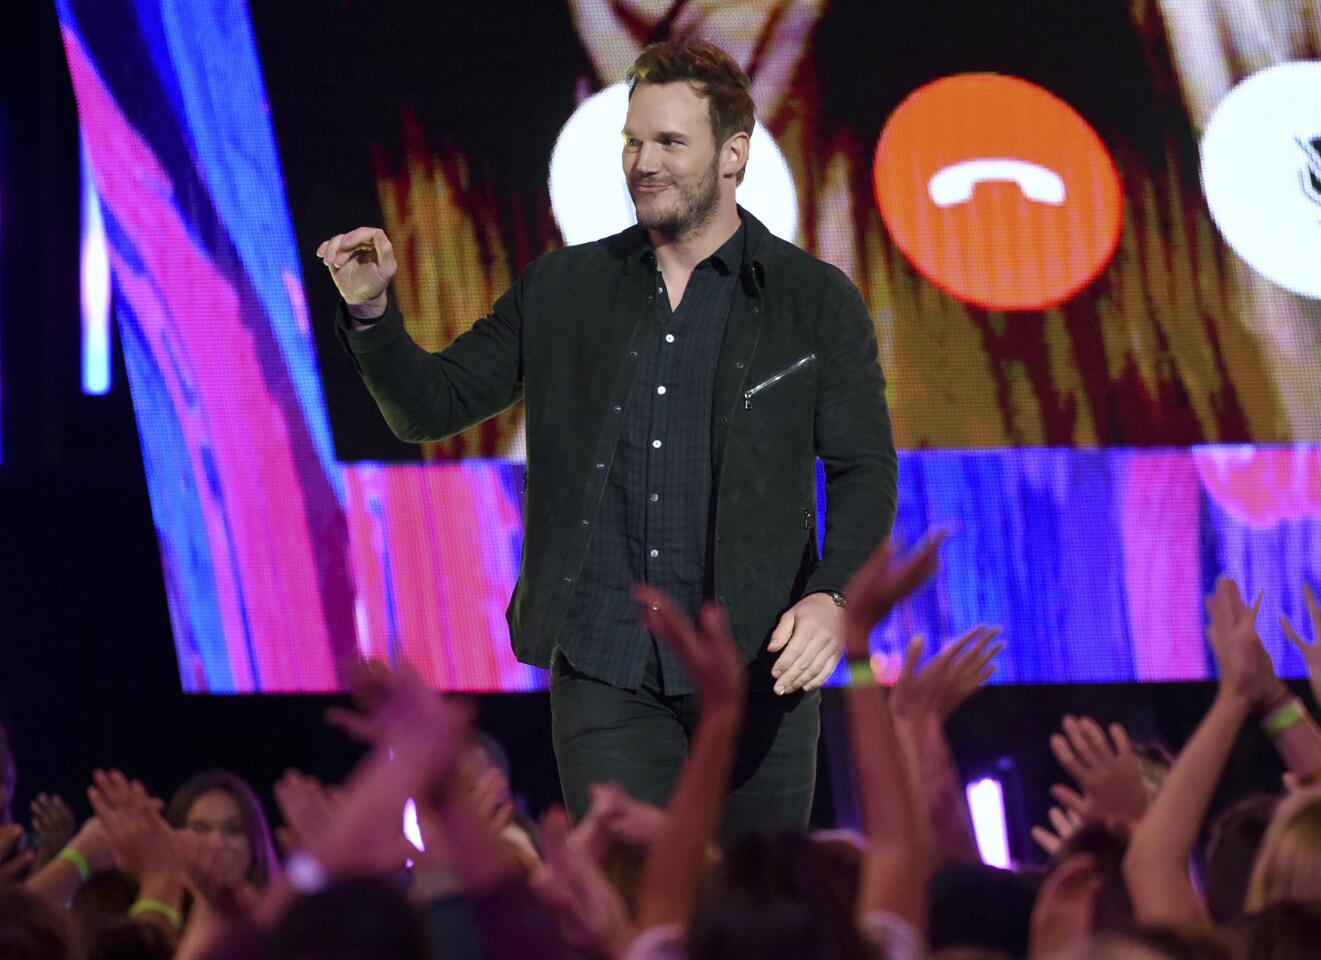 Chris Pratt greets the audience Sunday as he accepts the award for choice sci-fi movie actor for "Guardians of the Galaxy Vol. 2" at the Teen Choice Awards on Sunday at the Galen Center in Los Angeles.